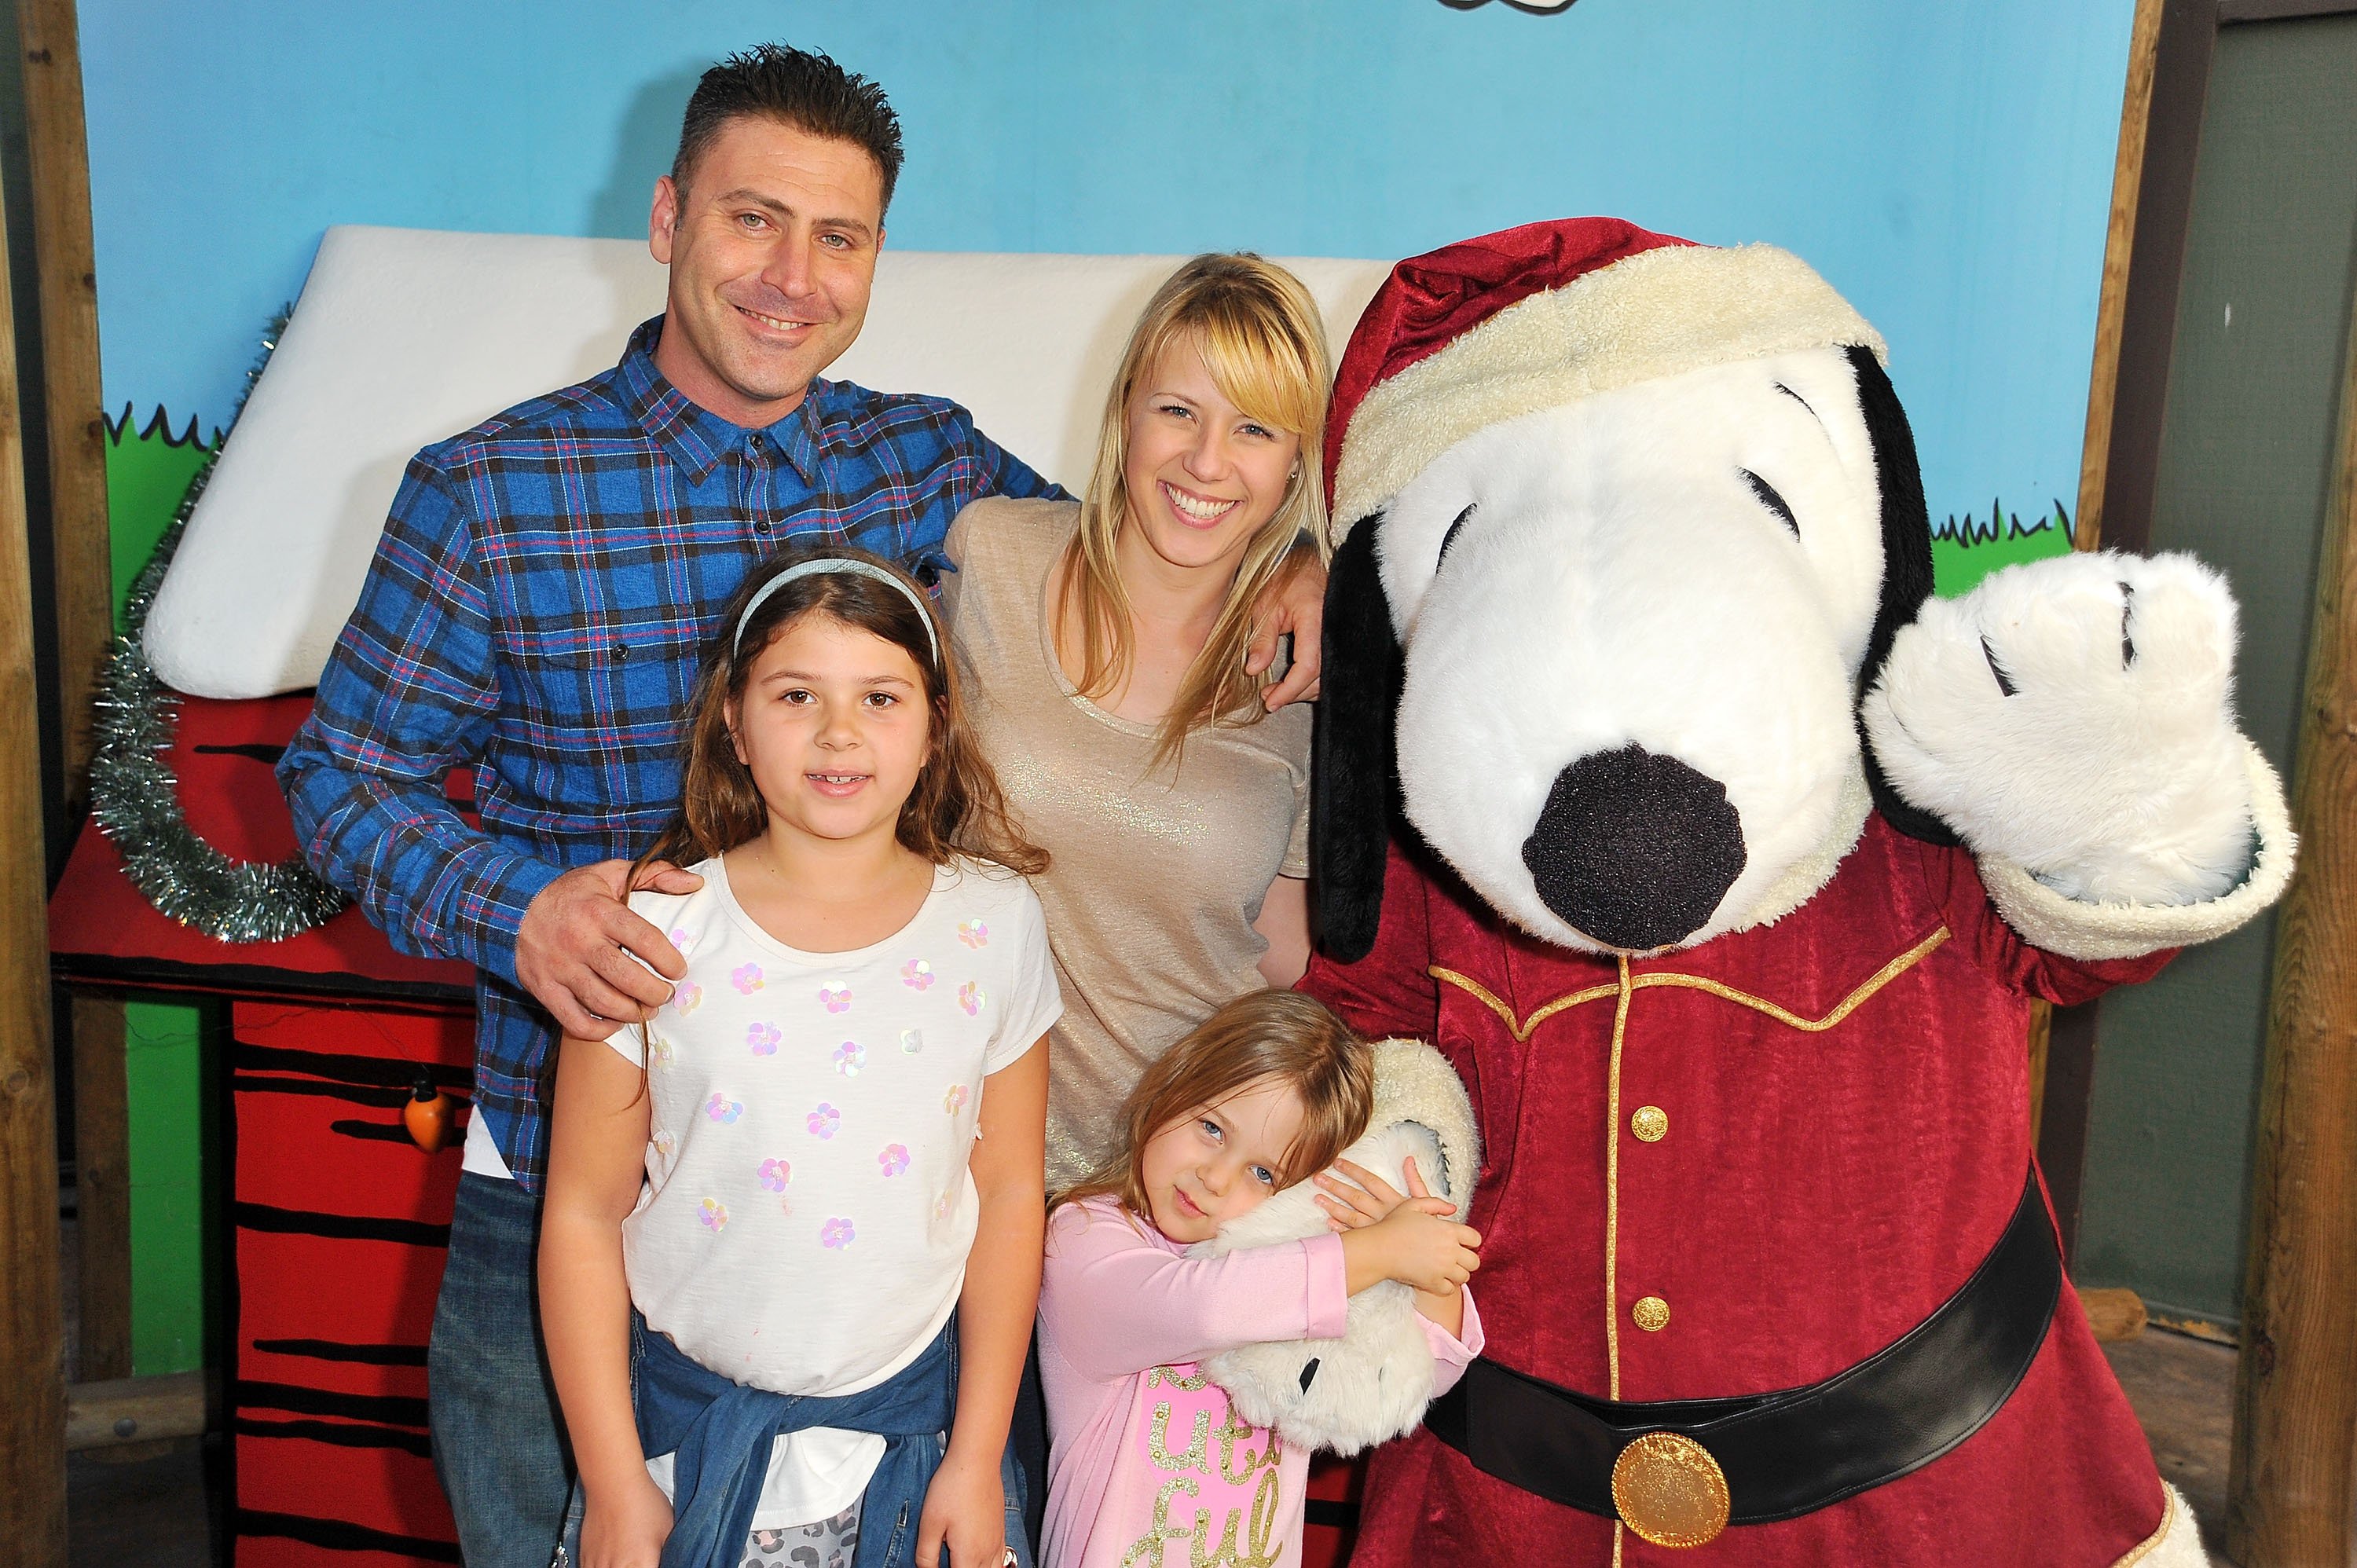 Justin Hodak, Beatrix Sweetin-Coyle, Zoie Herpin and Jodie Sweetin attend Knott's Merry Farm Countdown to Christmas & Tree Lighting at Knott's Berry Farm on December 5, 2015 in Buena Park, California.┃Source: Getty Images